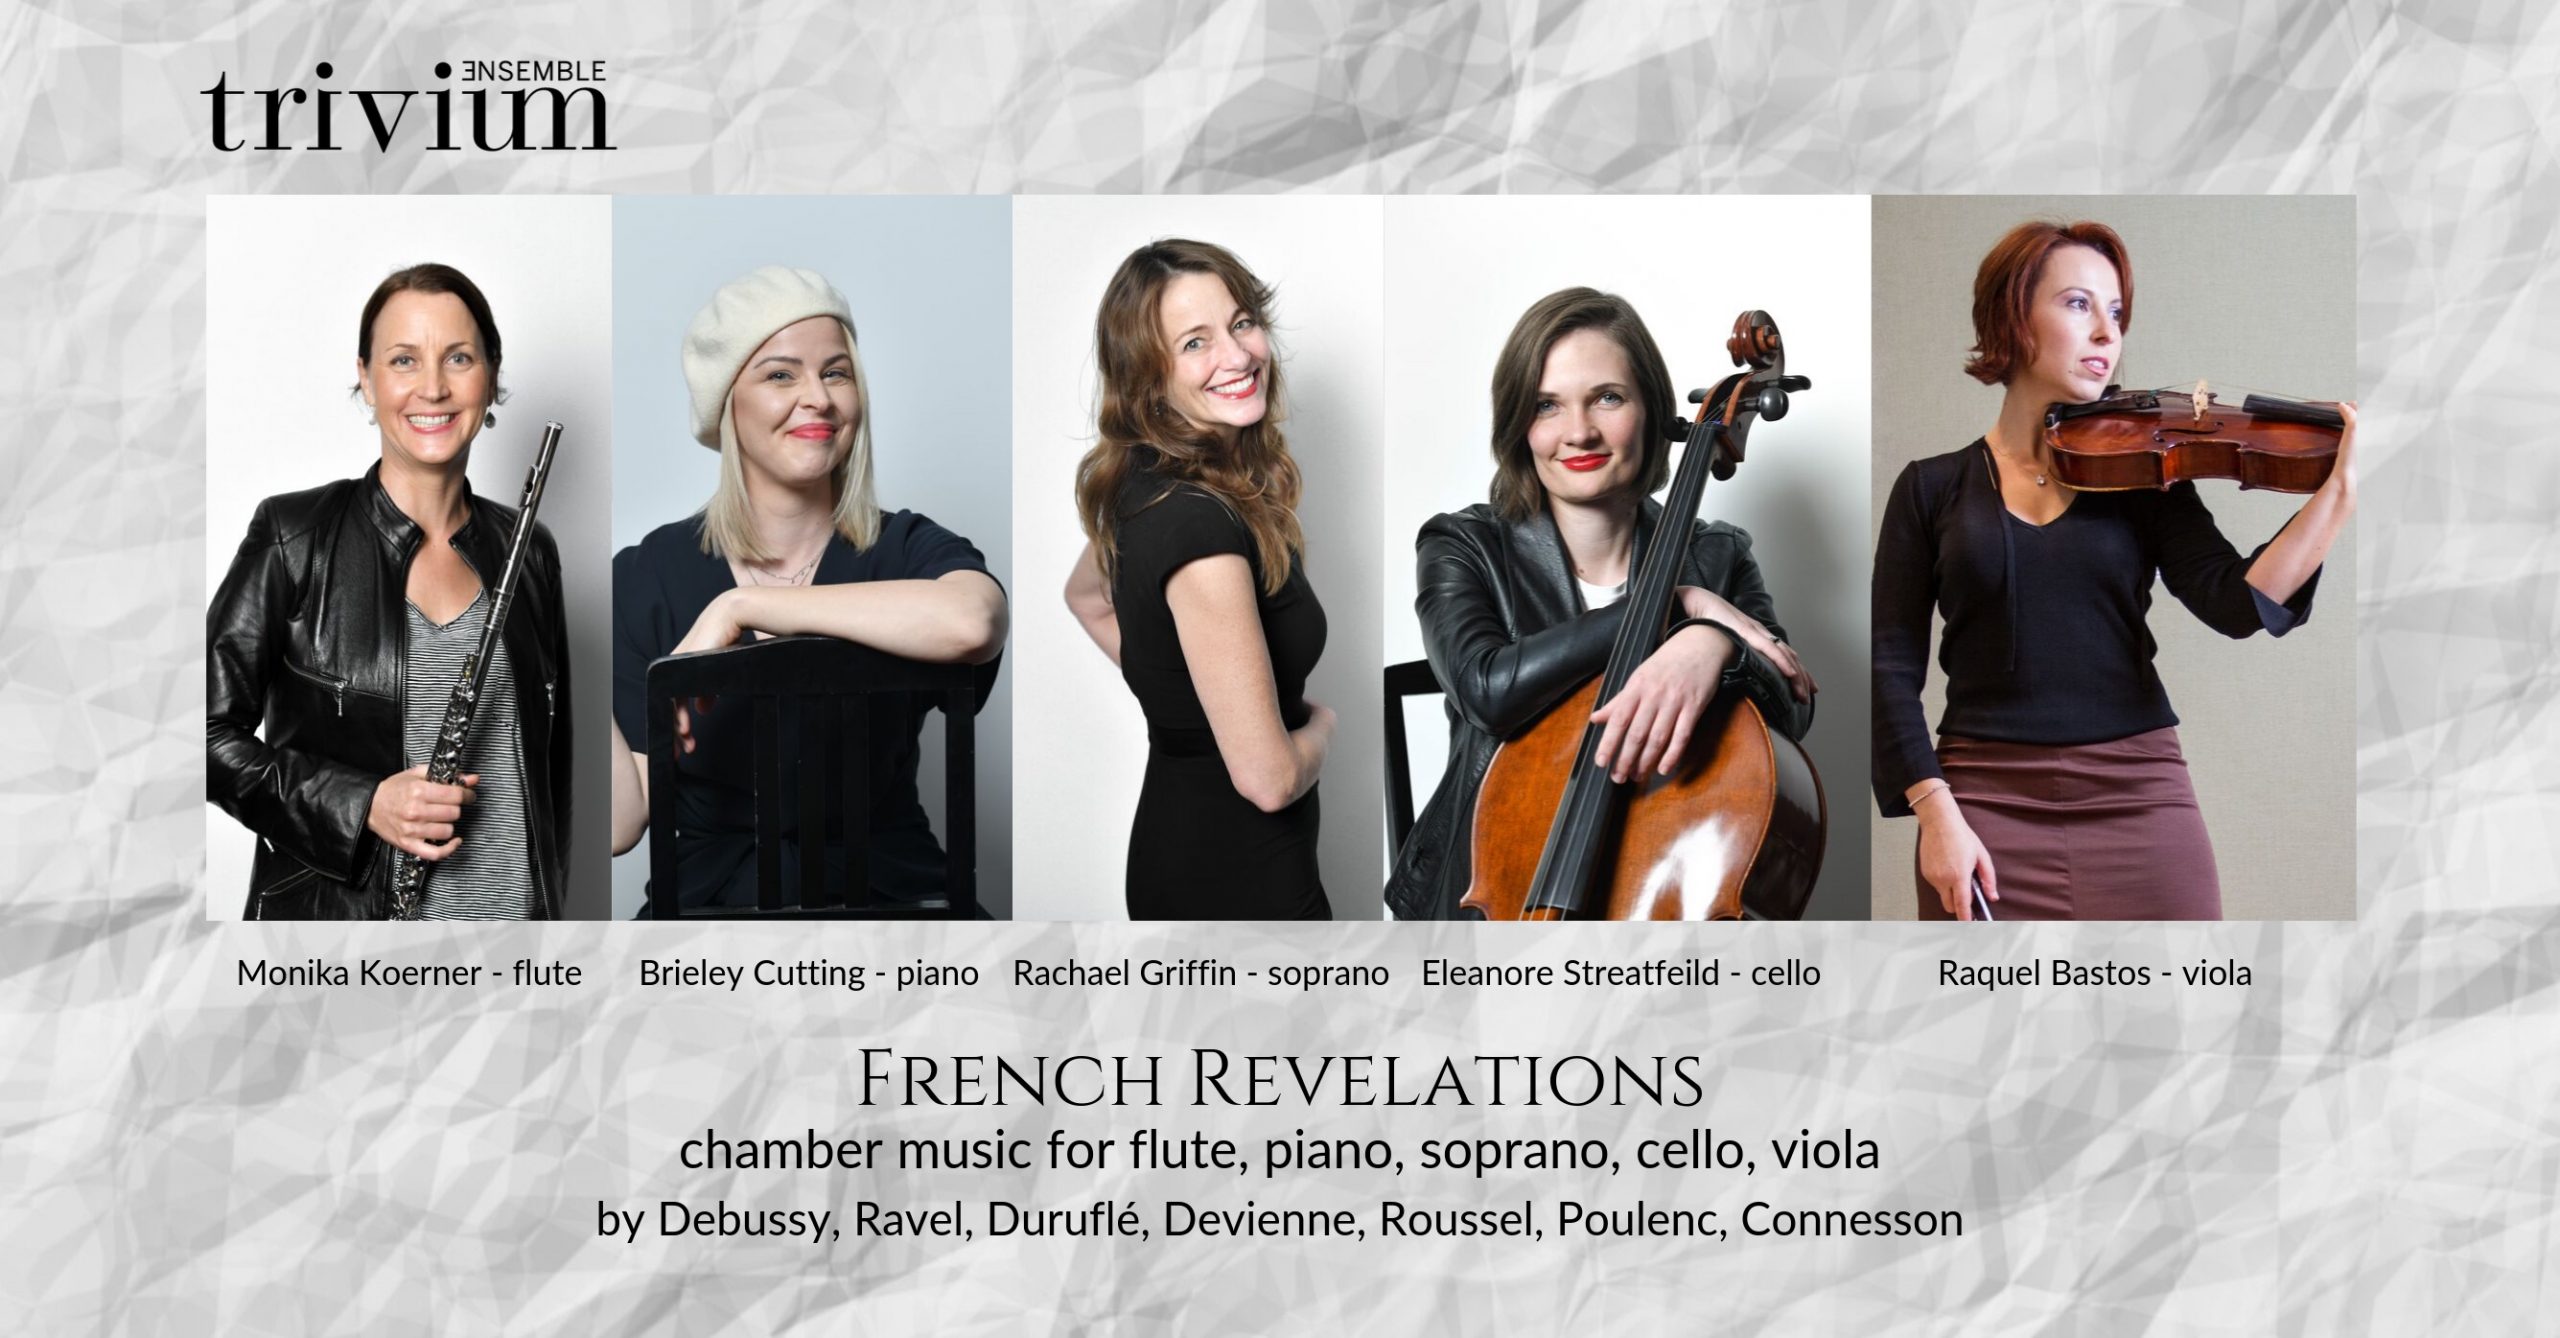 Ensemble Trivium showcased chamber music with a French twist